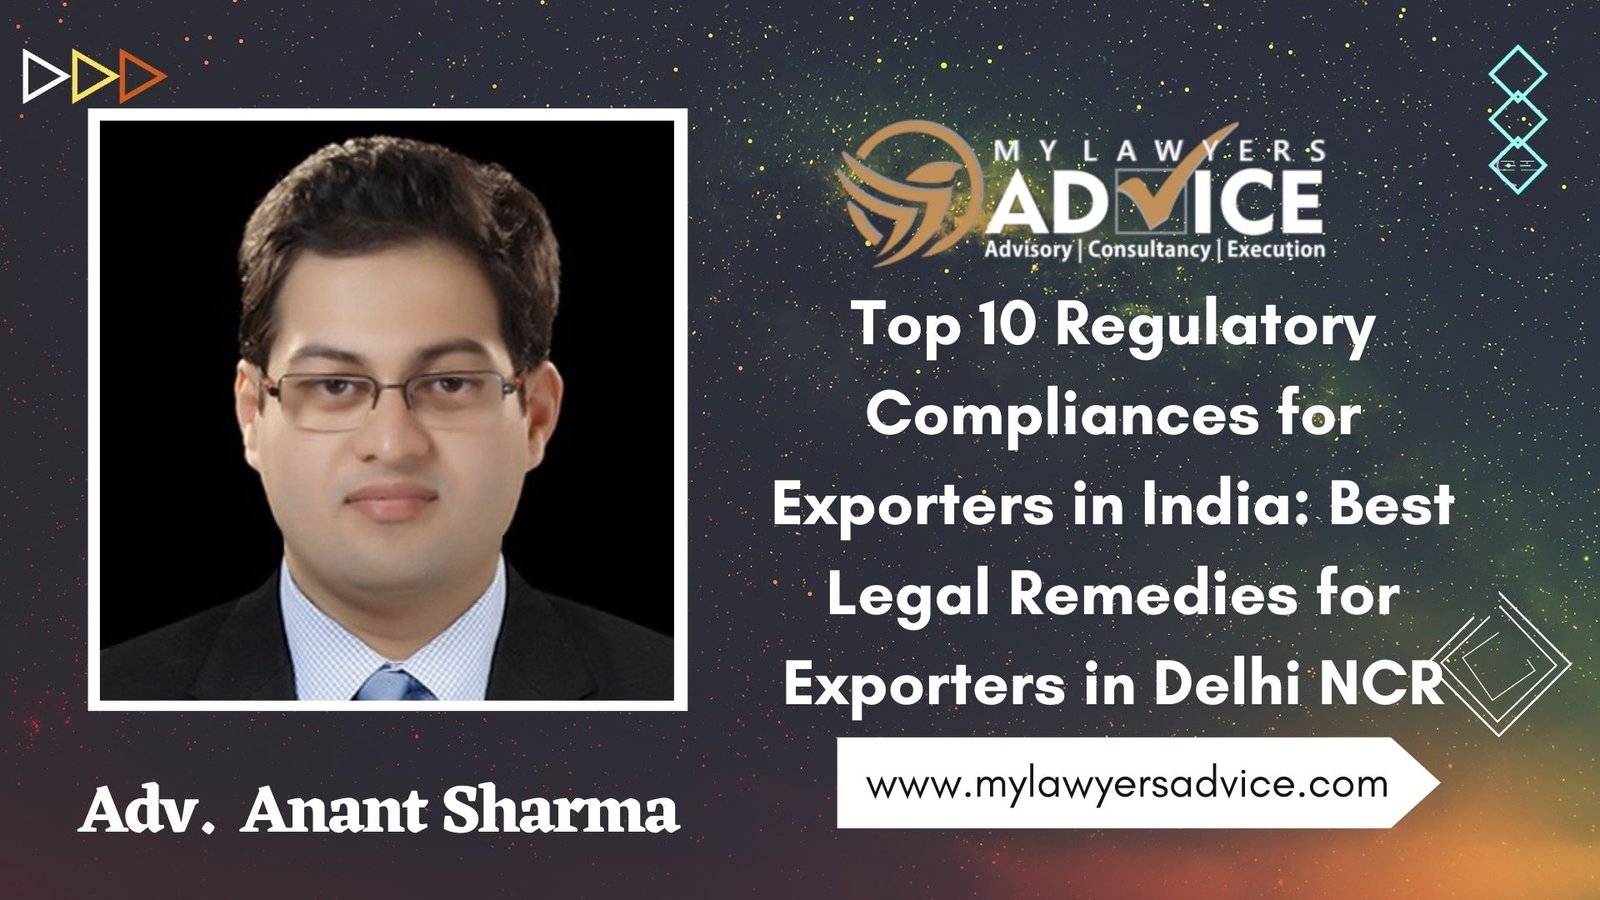 Top 10 Regulatory Compliances for Exporters in India: Best Legal Remedies for Exporters in Delhi NCR - Best and Experienced Lawyers online in India